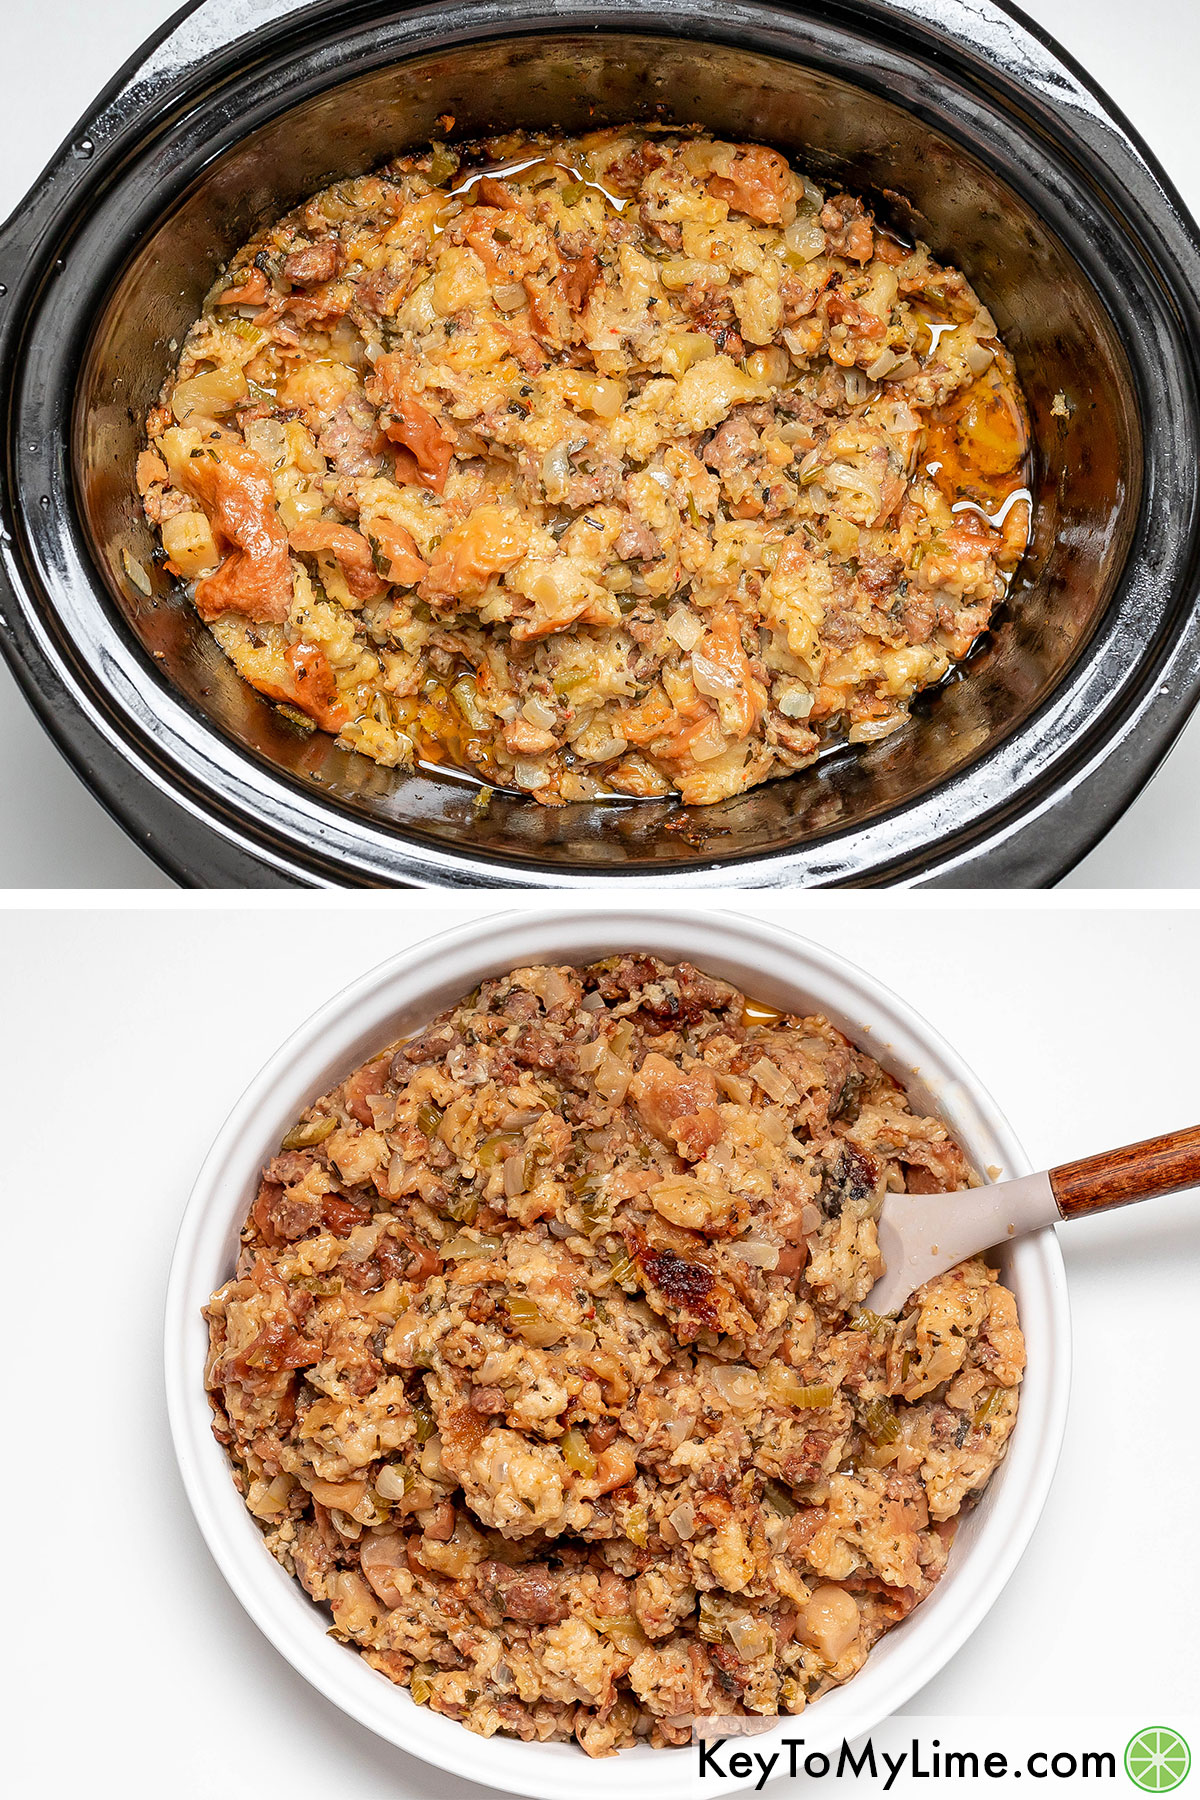 Mixing the stuffing together then transferring to a serving dish.